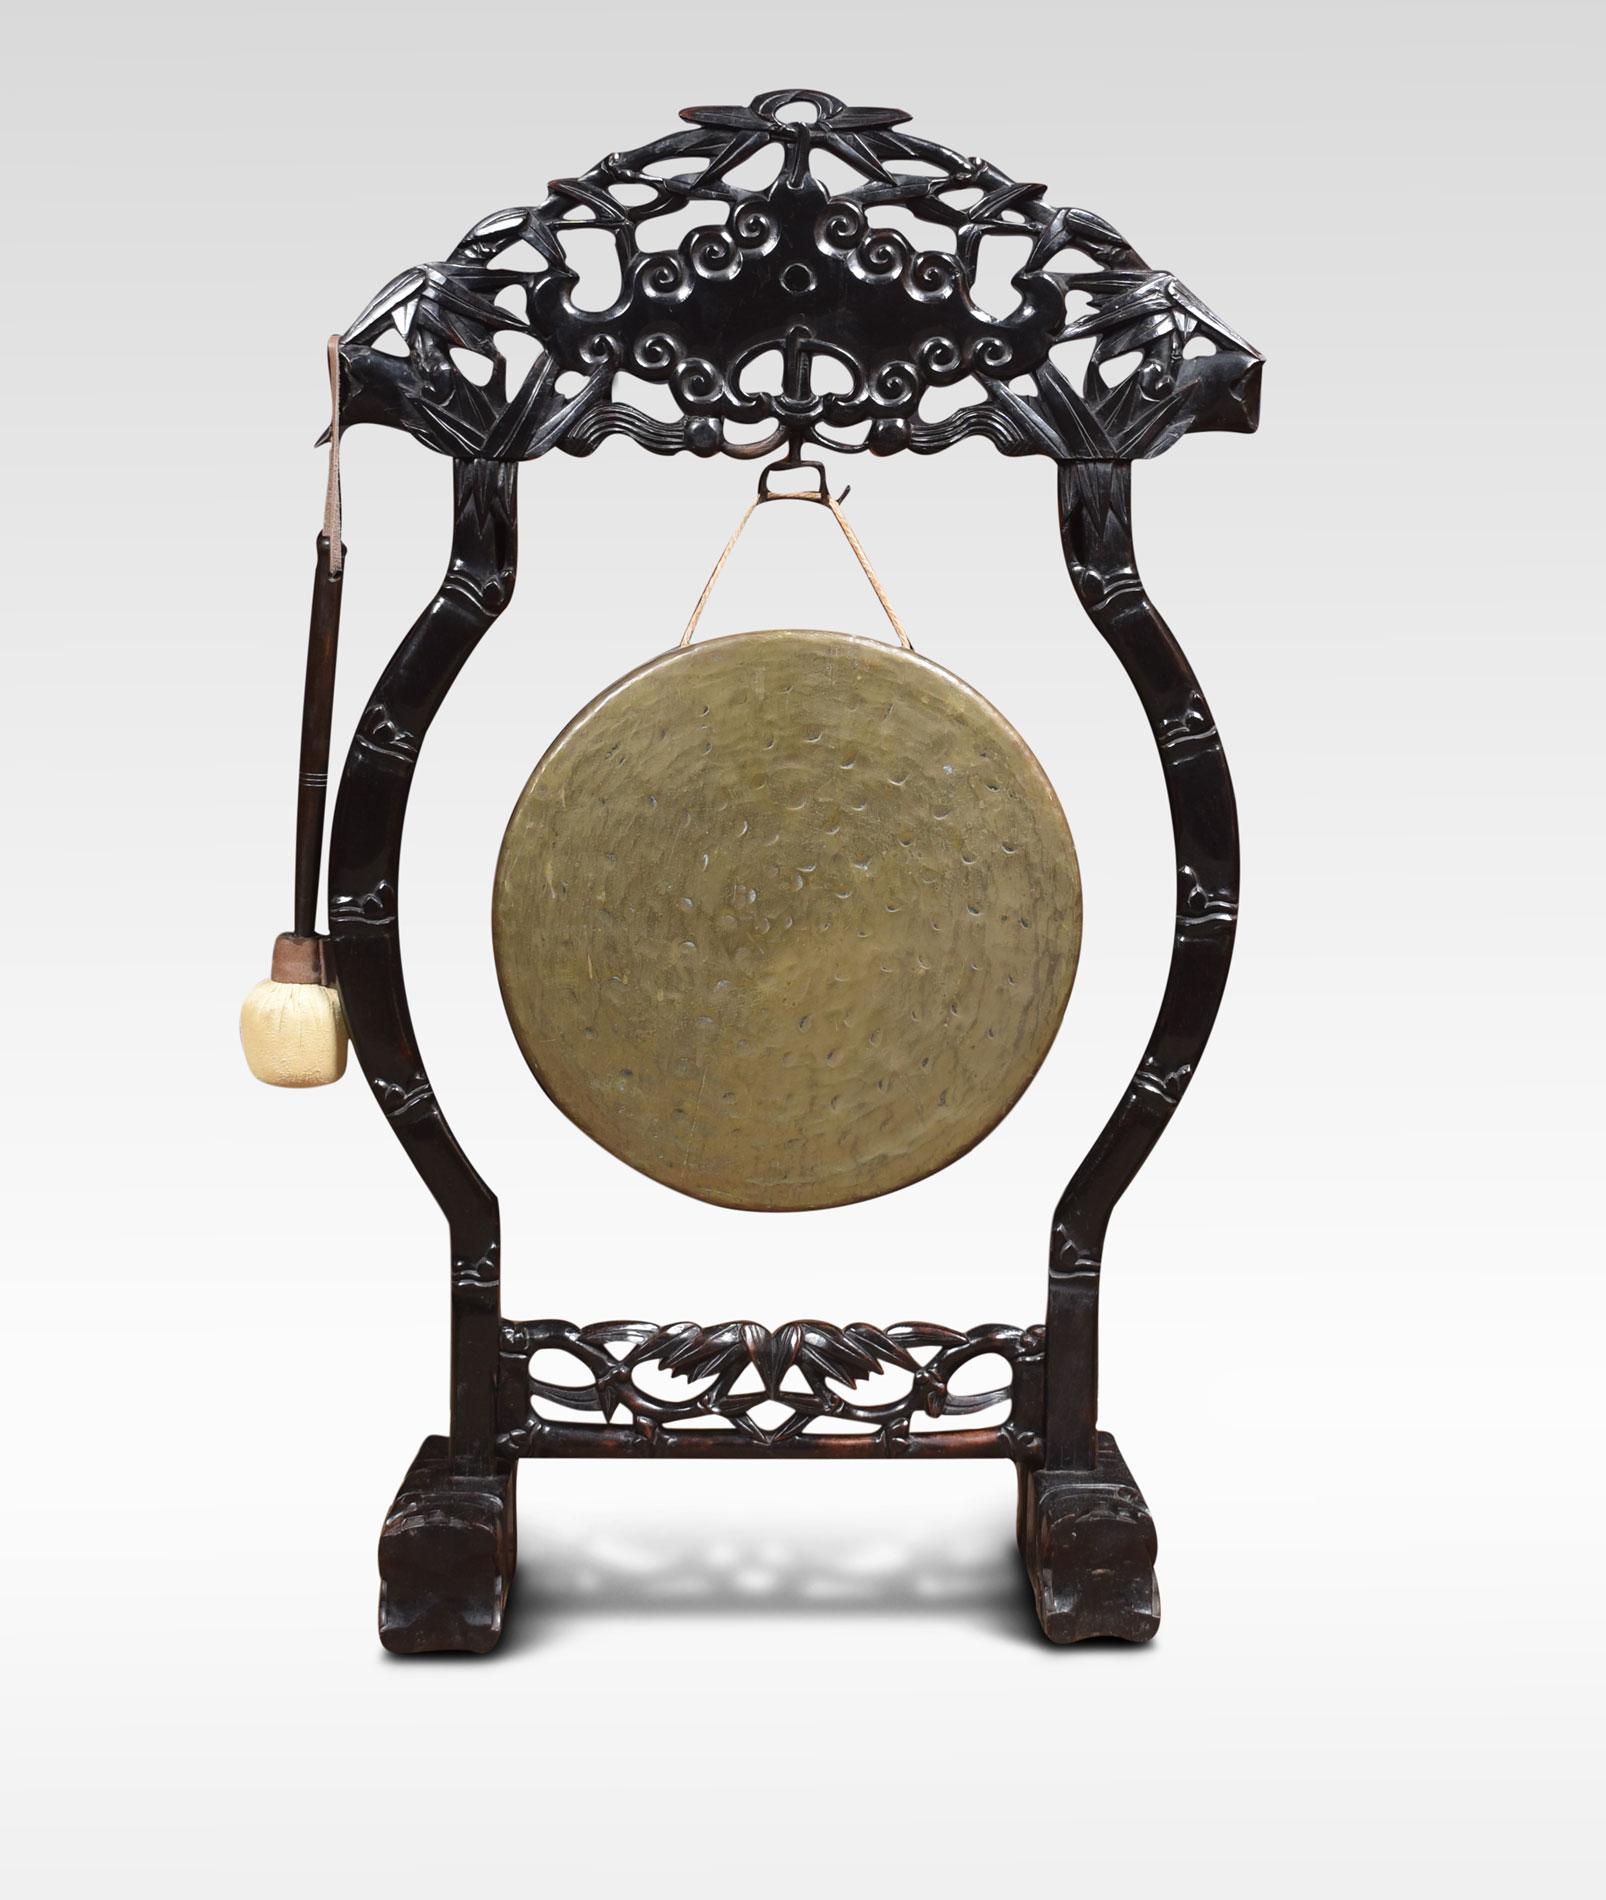 Chinese dinner gong, the profusely carved frame with pierced decoration, supporting the original brass gong and beater. All raised up on stylised block feet.
Dimensions:
Height 36 inches
Width 22 inches
Depth 8.5 inches.